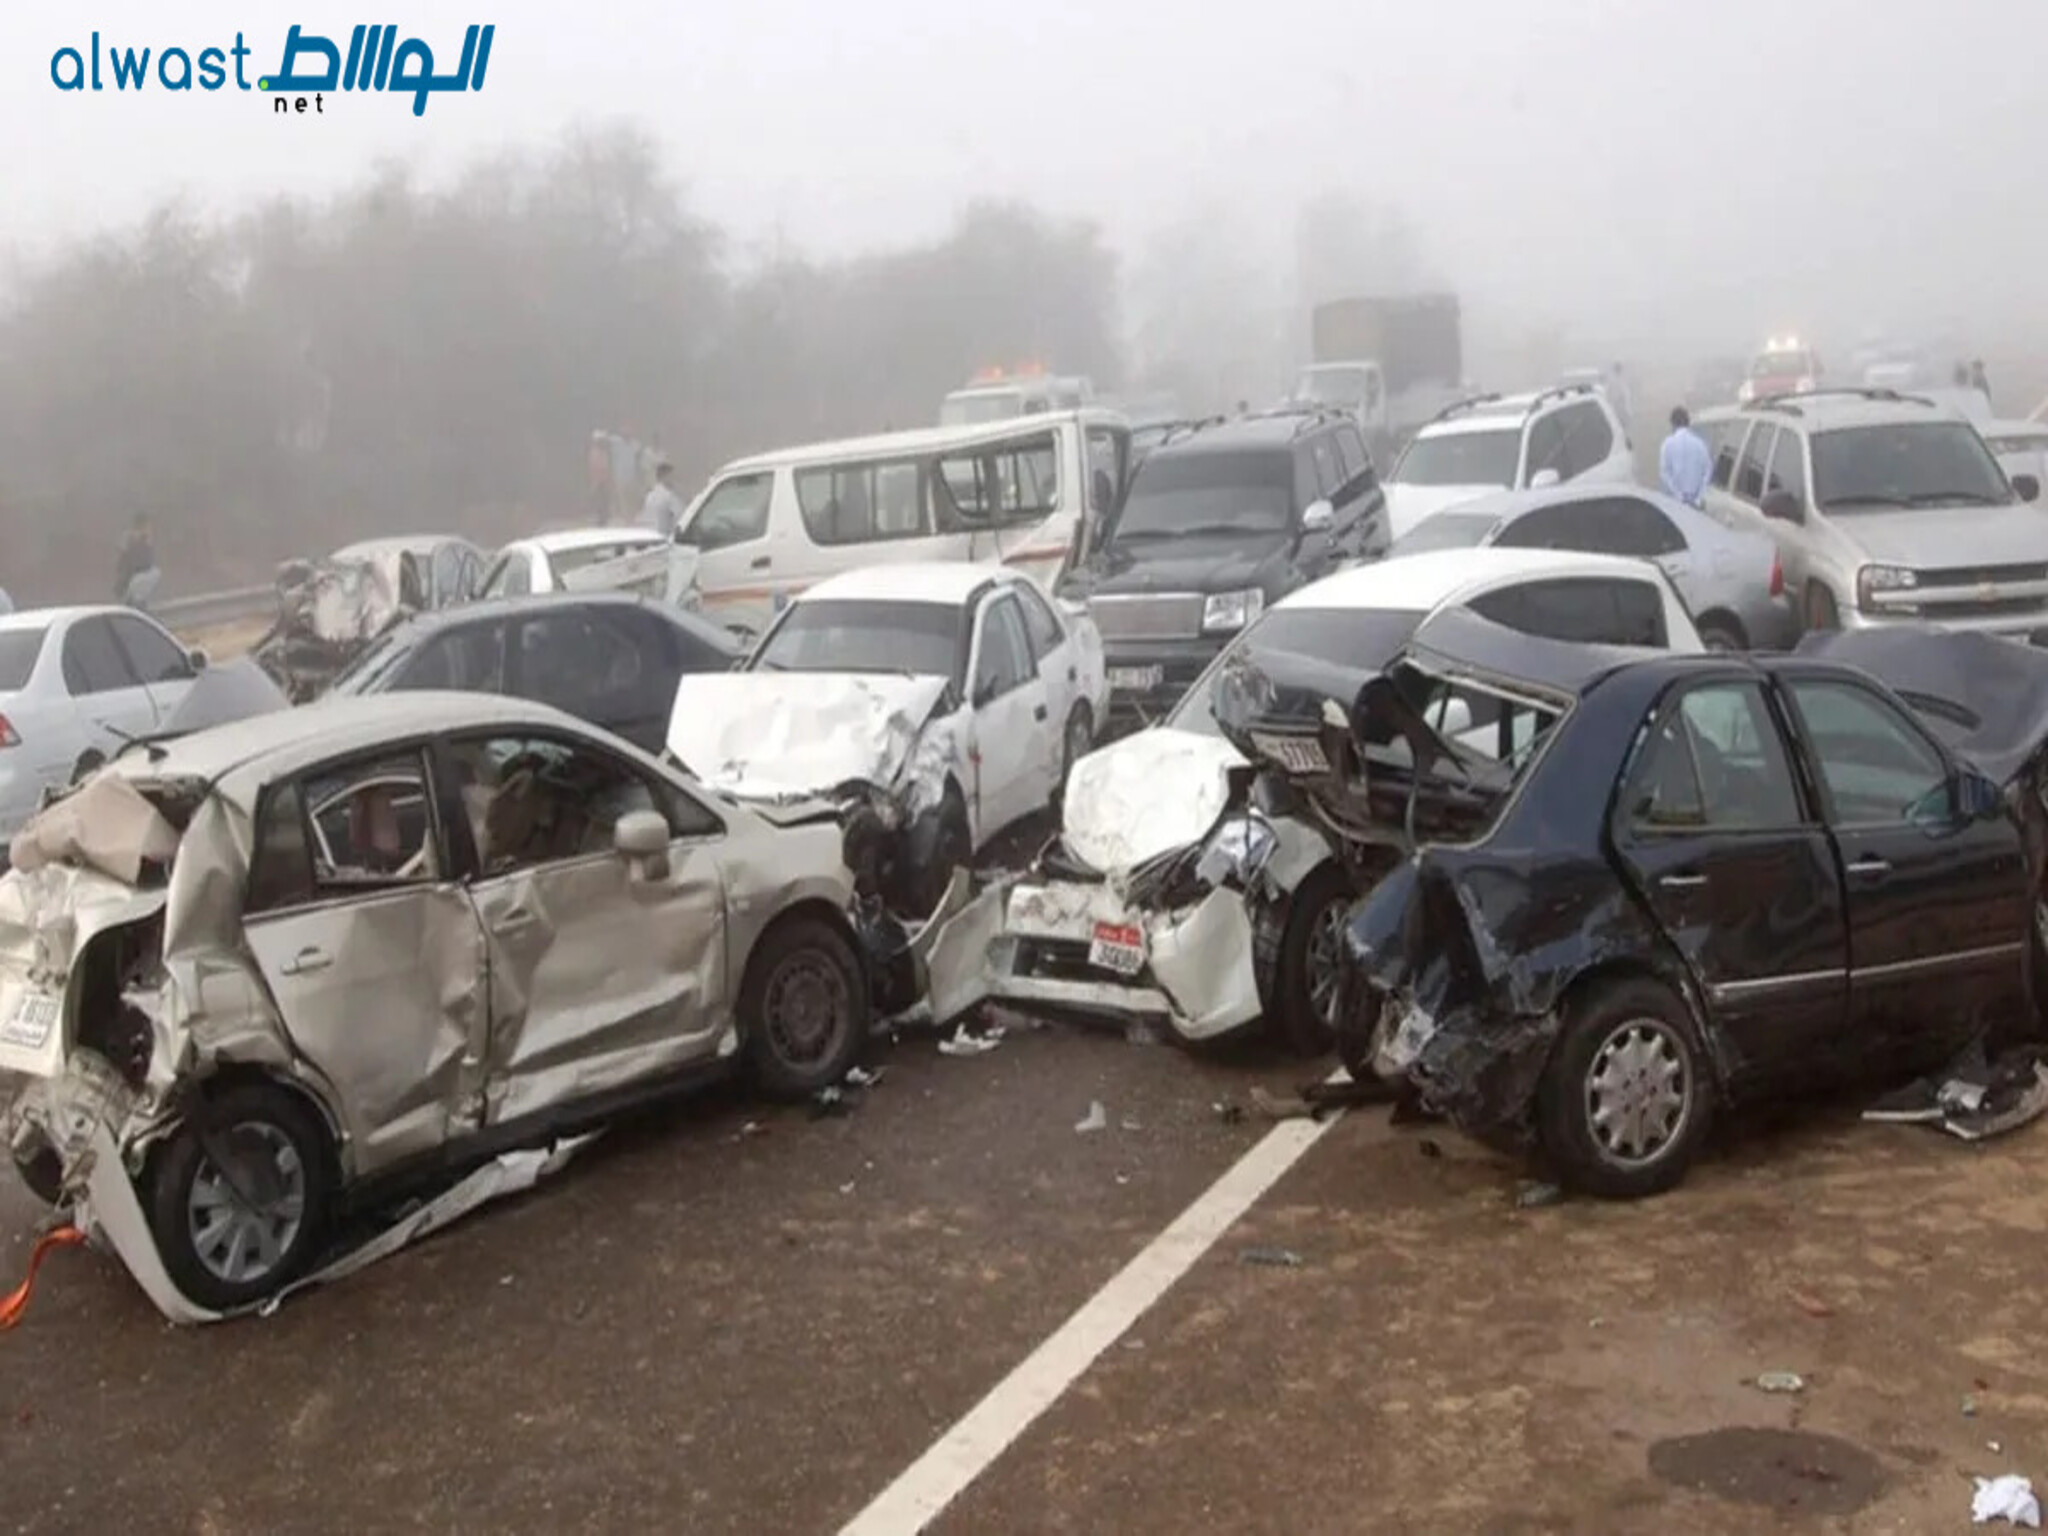 Fatal Traffic Accident on Emirates Road Claims 3 Lives and a fourth was injured